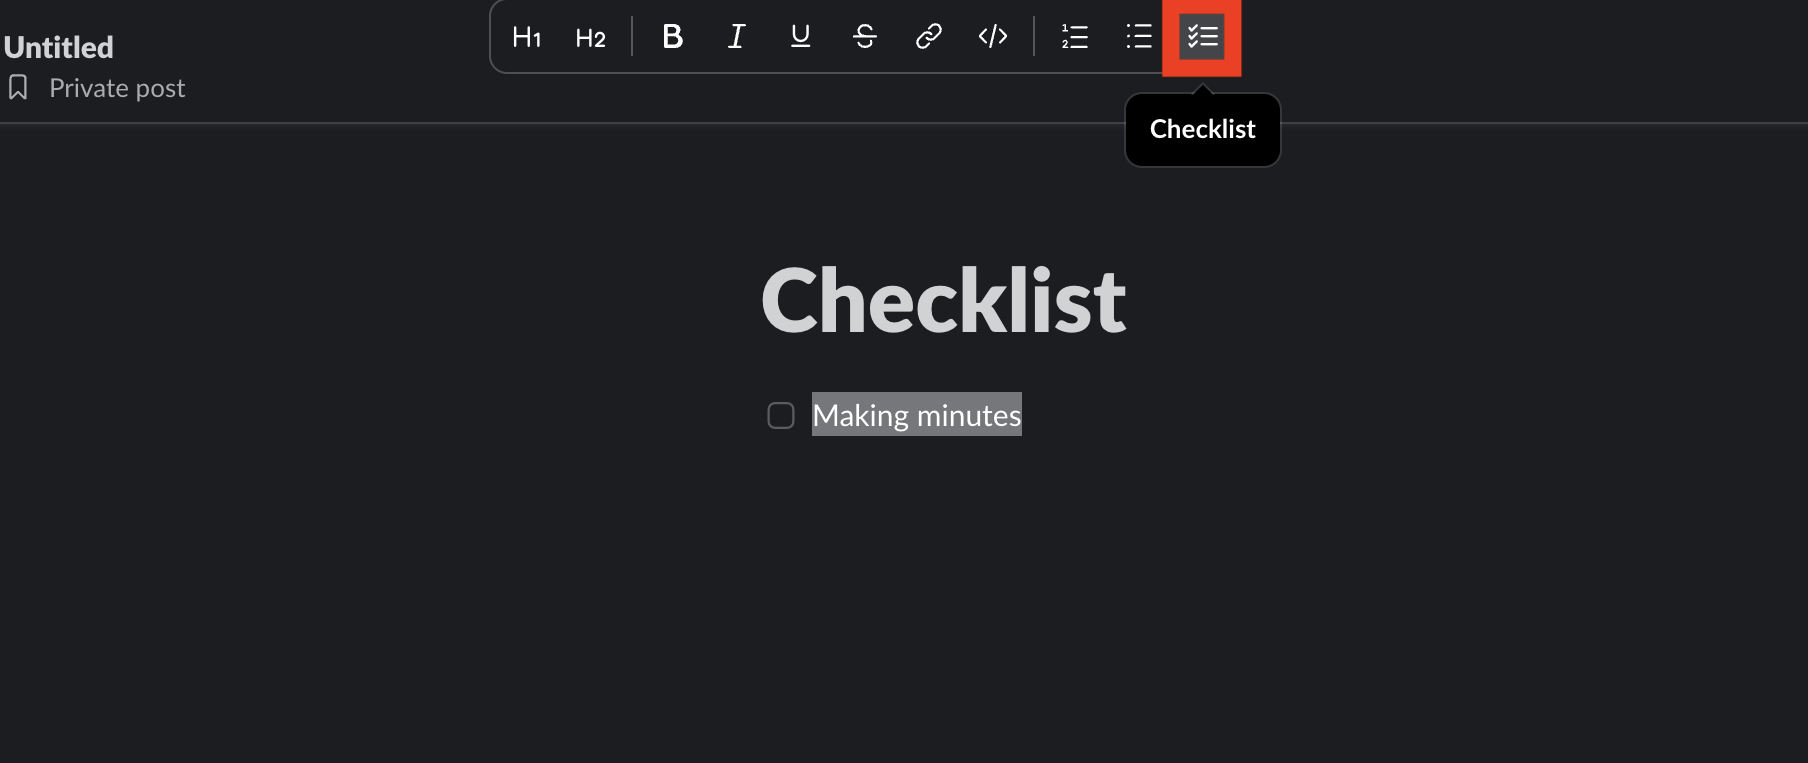 Image of clicking the checkbox